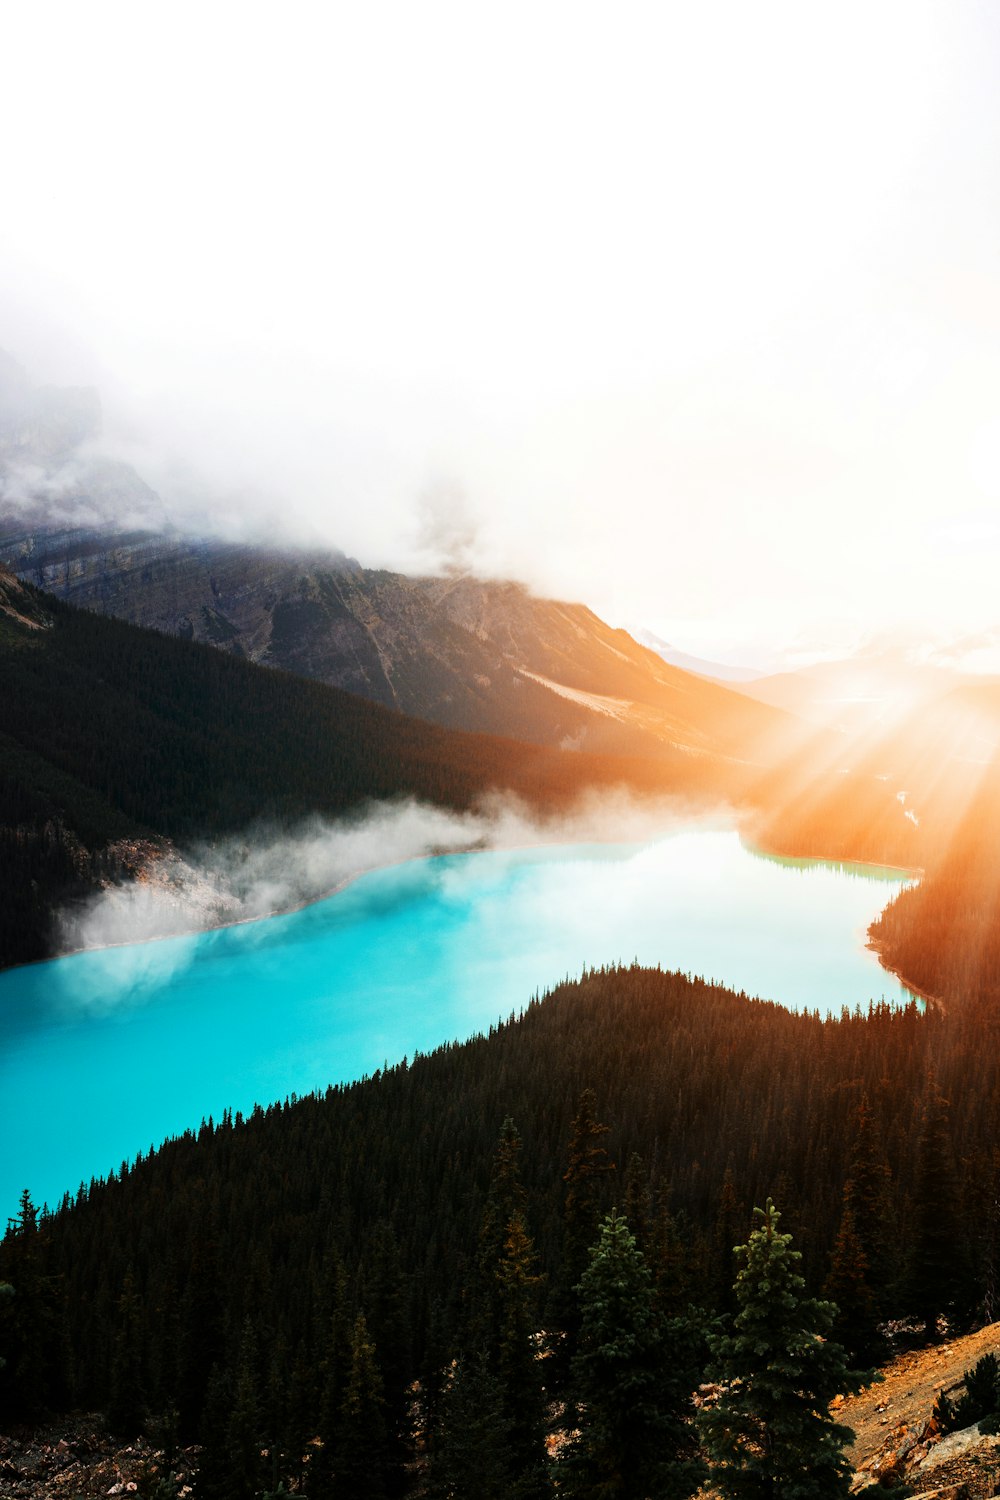 the sun is shining over a mountain lake